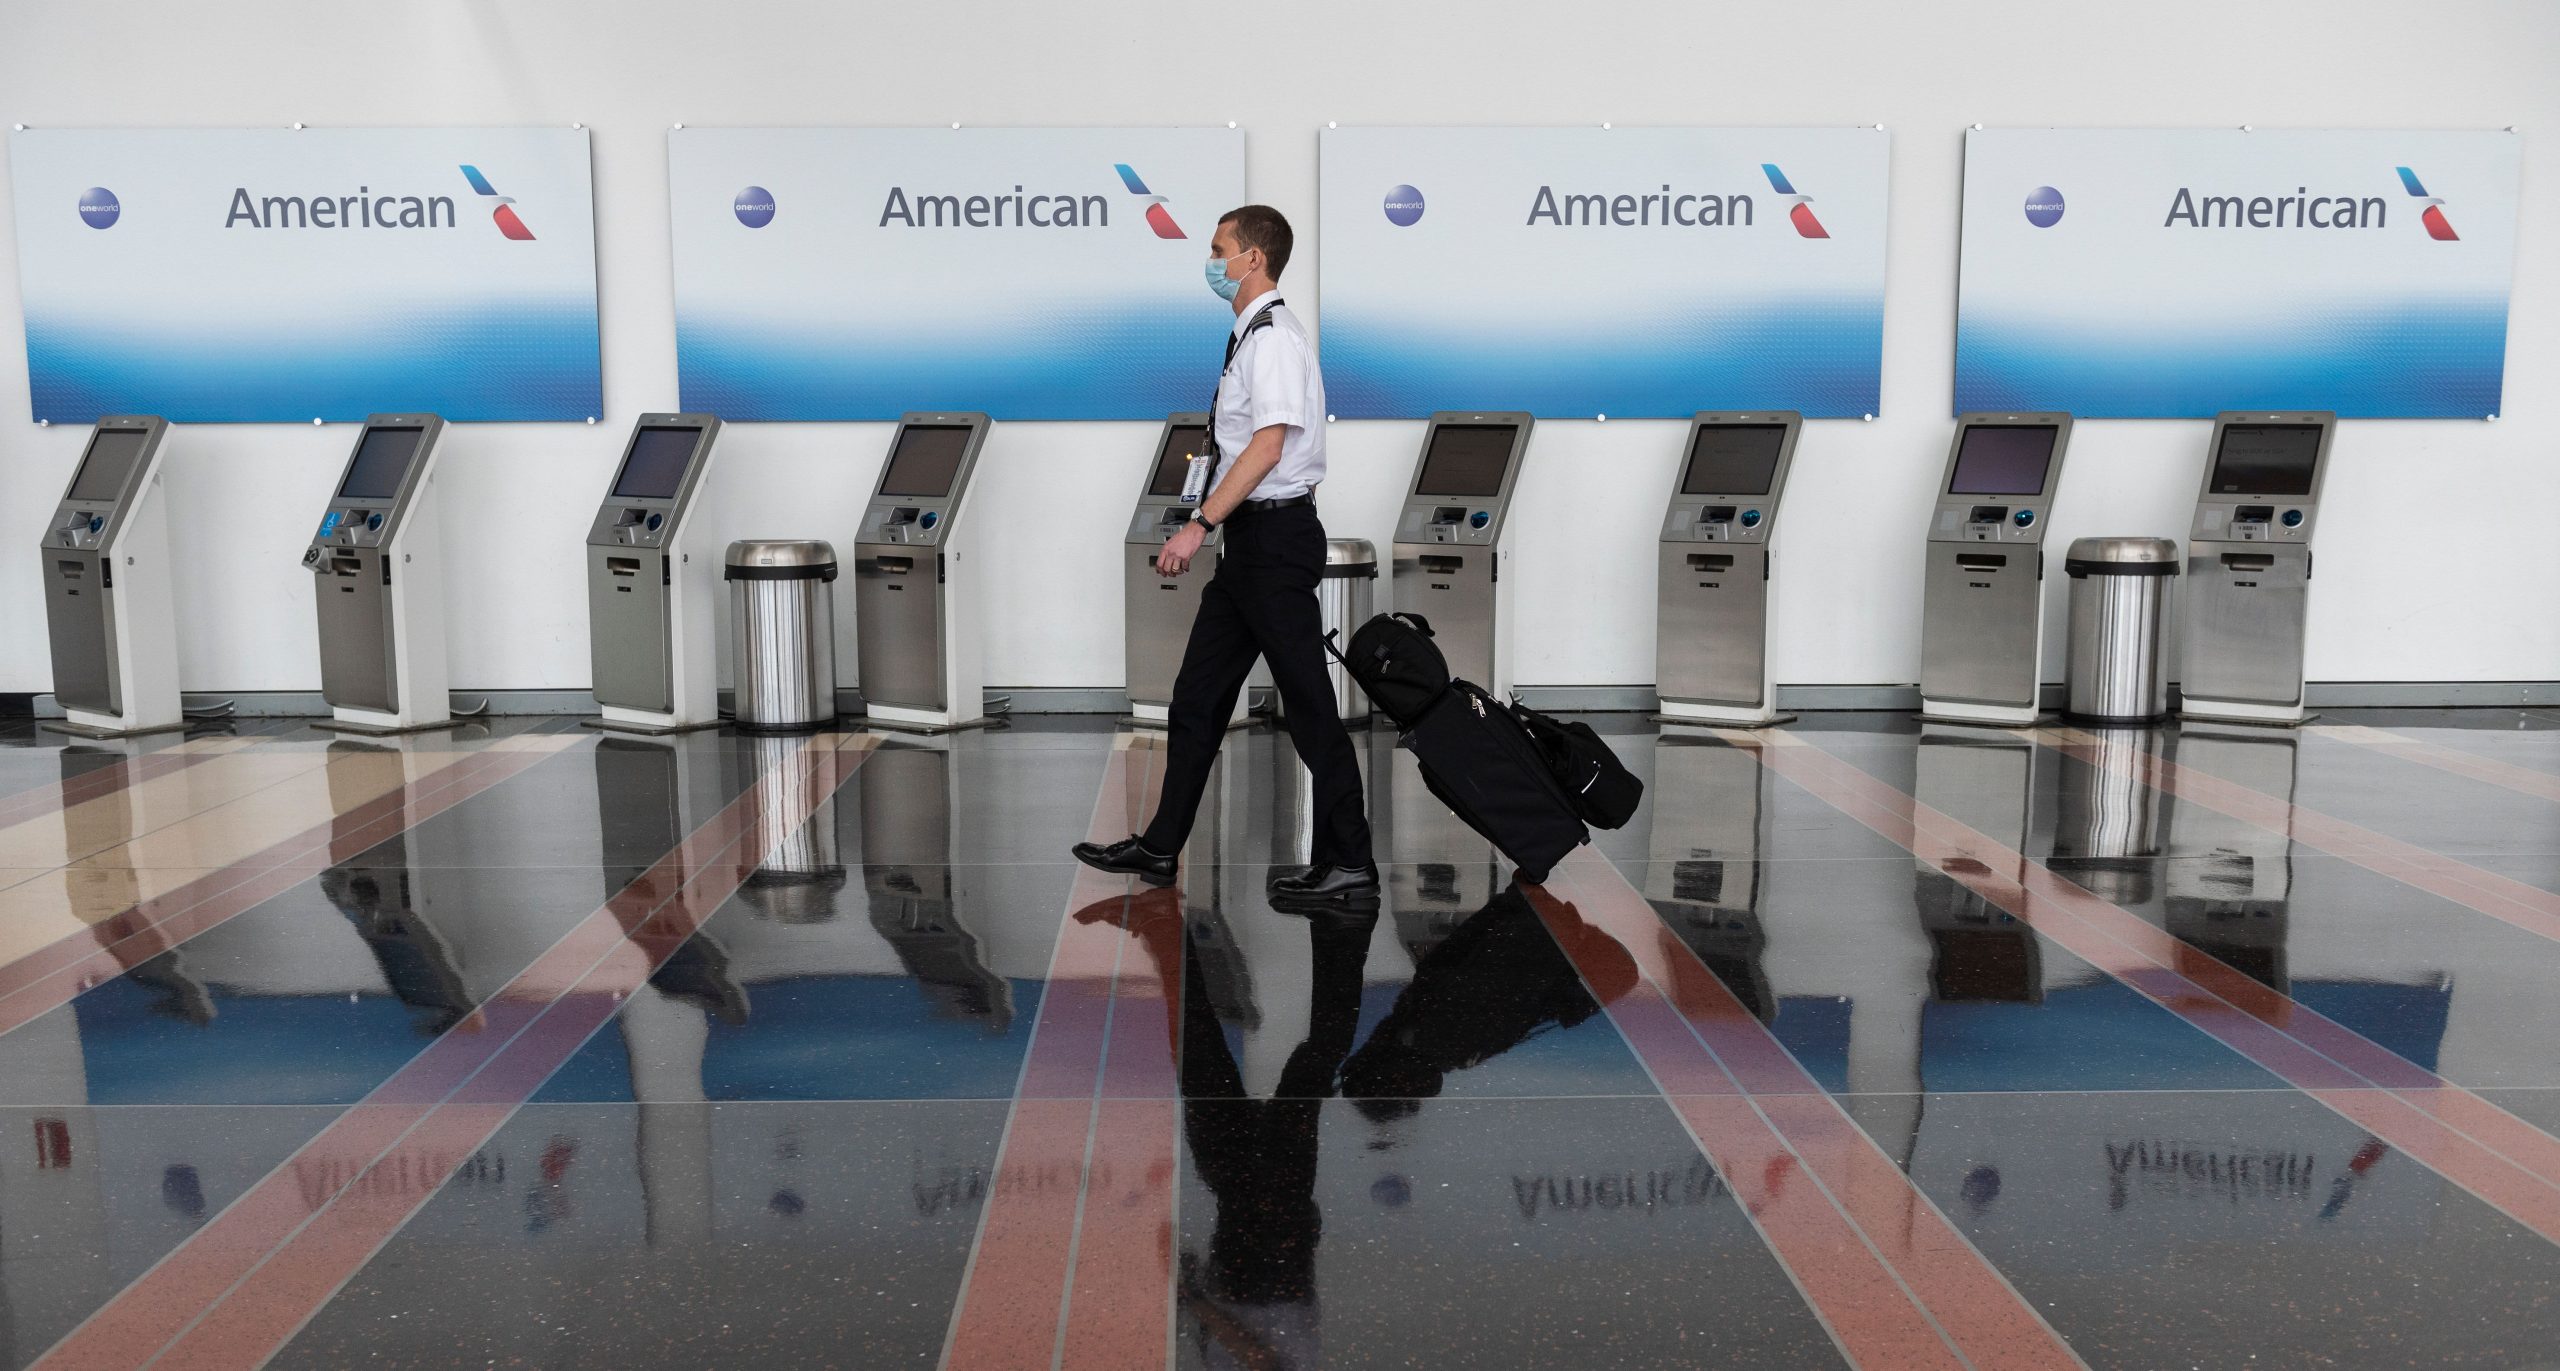 American Airlines plans to hire 18,000 people next year for travel rebound